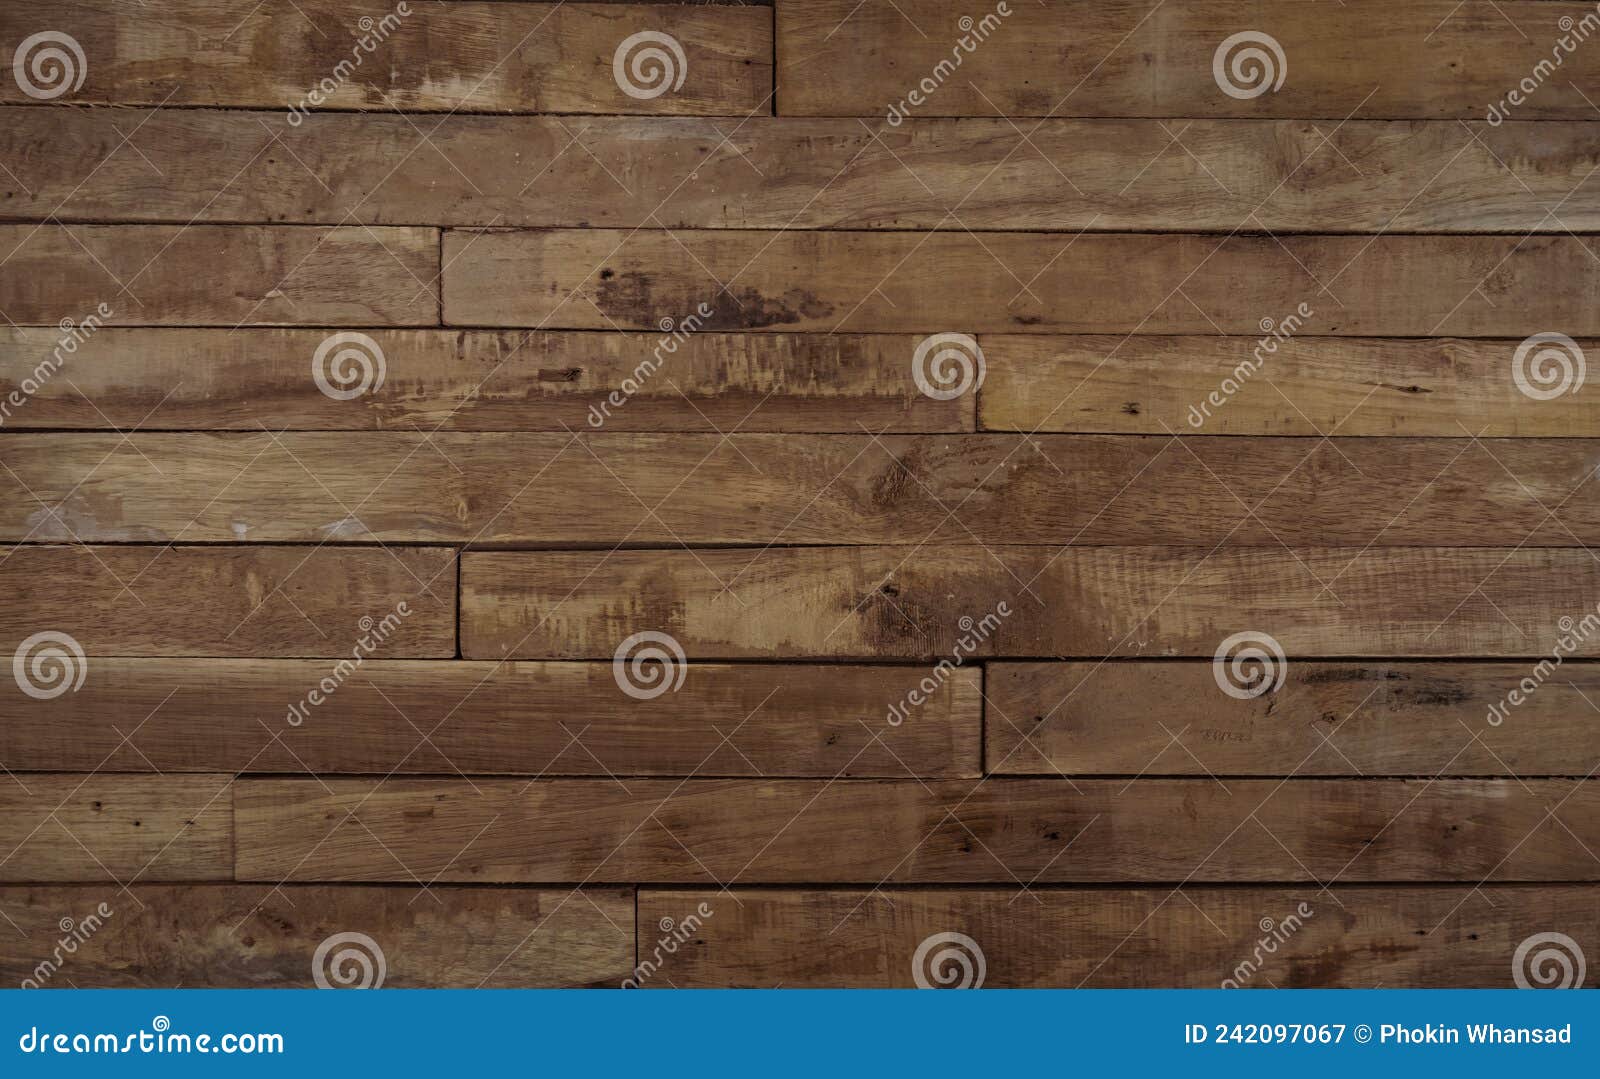 brown wood texture background. wooden planks old of table top view and board nature pattern are grain hardwood panel floor. 